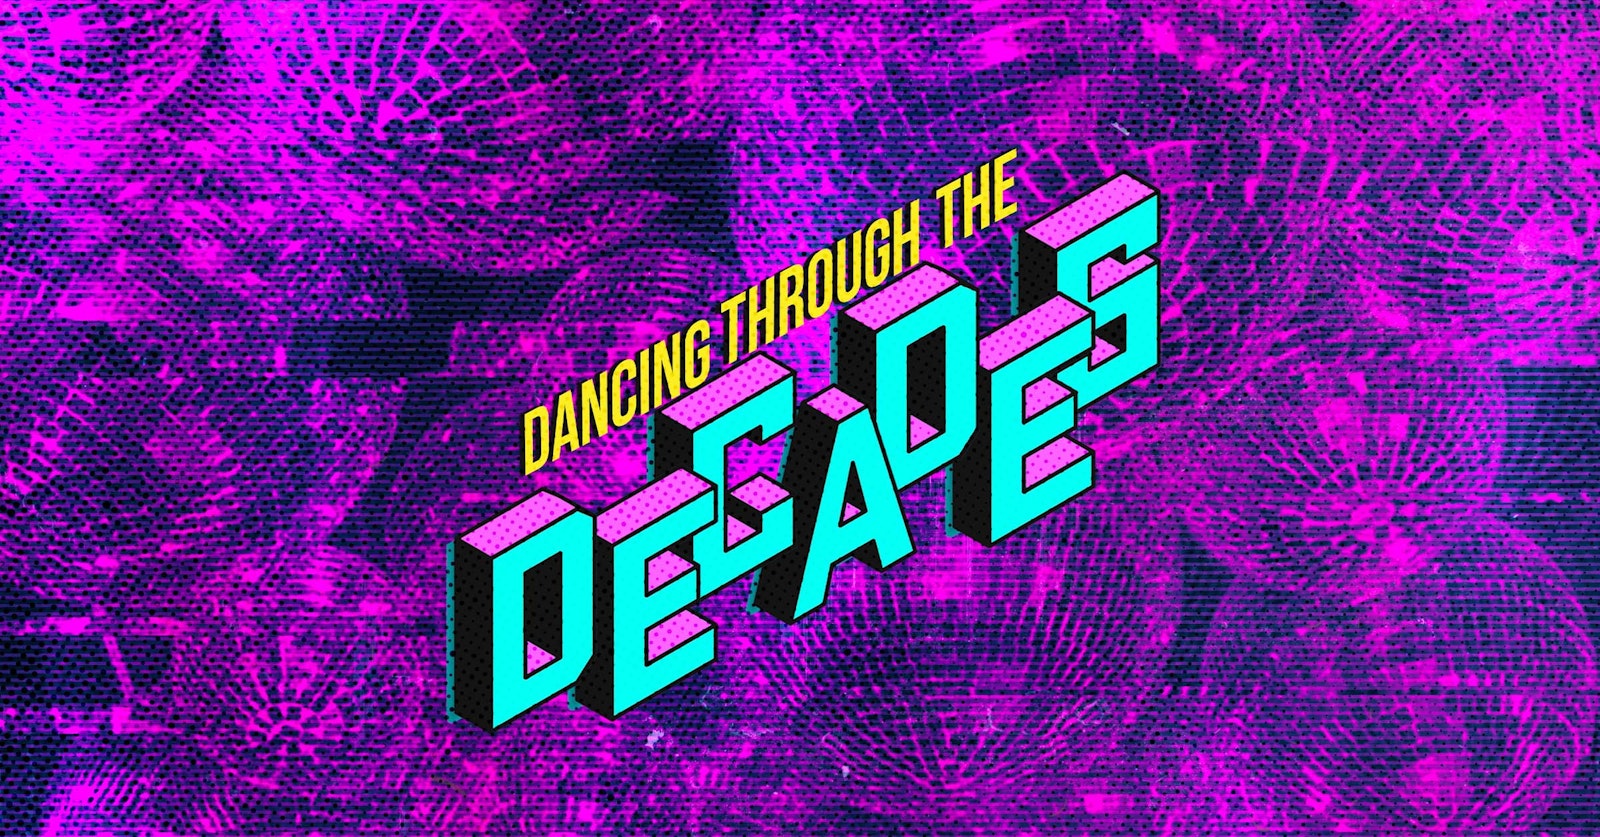 DECADES 🌈🪩 £1 TICKETS ON SALE NOW! / £1 JAGERS & £2.95 DOUBLES / 3 ROOMS OF GROOVE 🎵